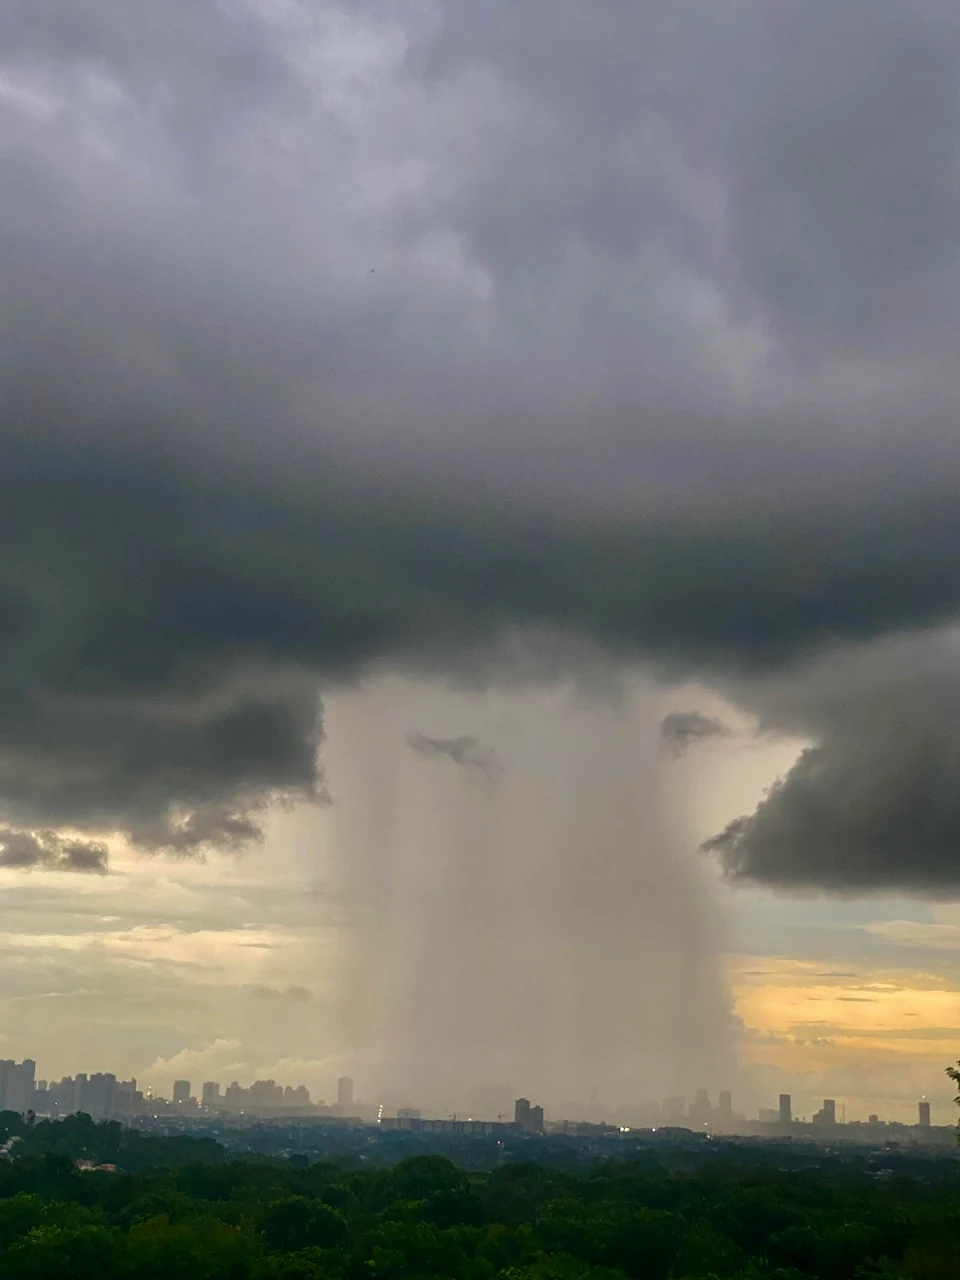 Isolated rain storm this week over Manila Philippines.